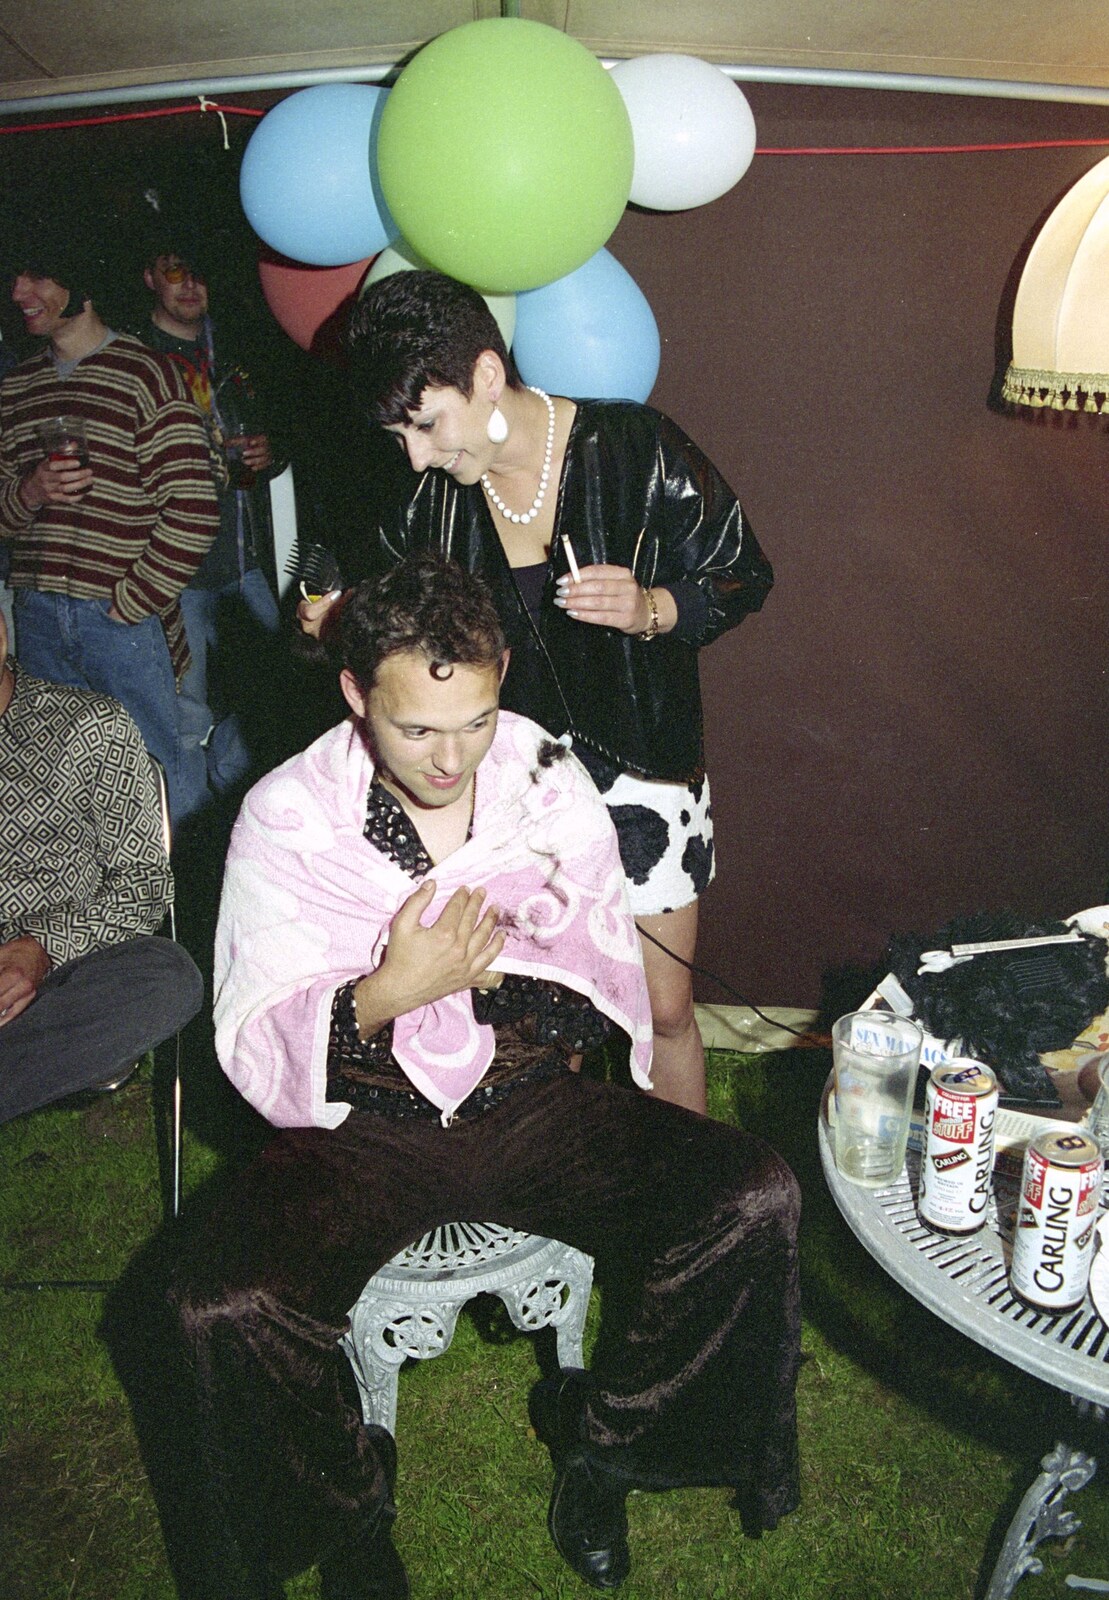 Paul Jay gets his hair shaved off from "Dave's" CISU Fancy Dress Party, Finbar's Walk, Ipswich - 15th September 1999